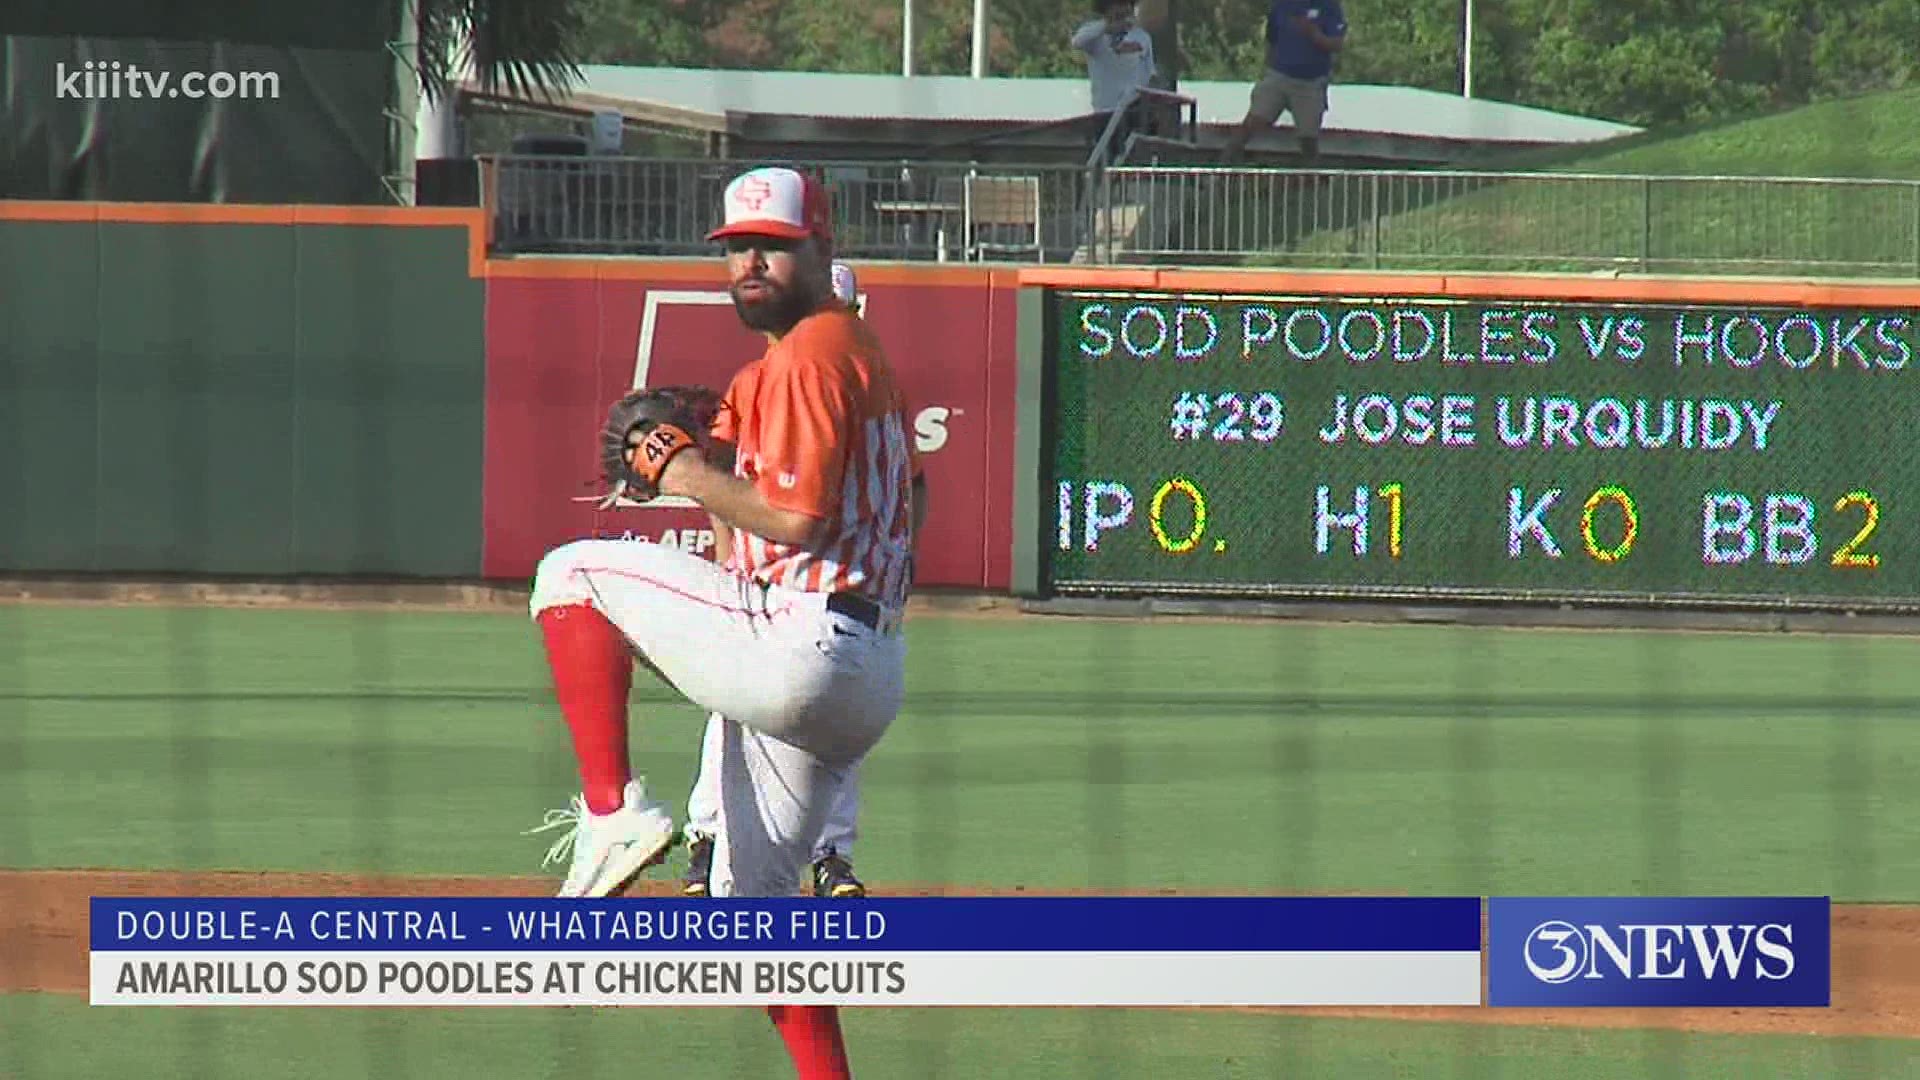 Jose Urquidy tossed 3.2 IP of scoreless ball as Corpus Christi would go on to beat the Sod Poodles 7-2.